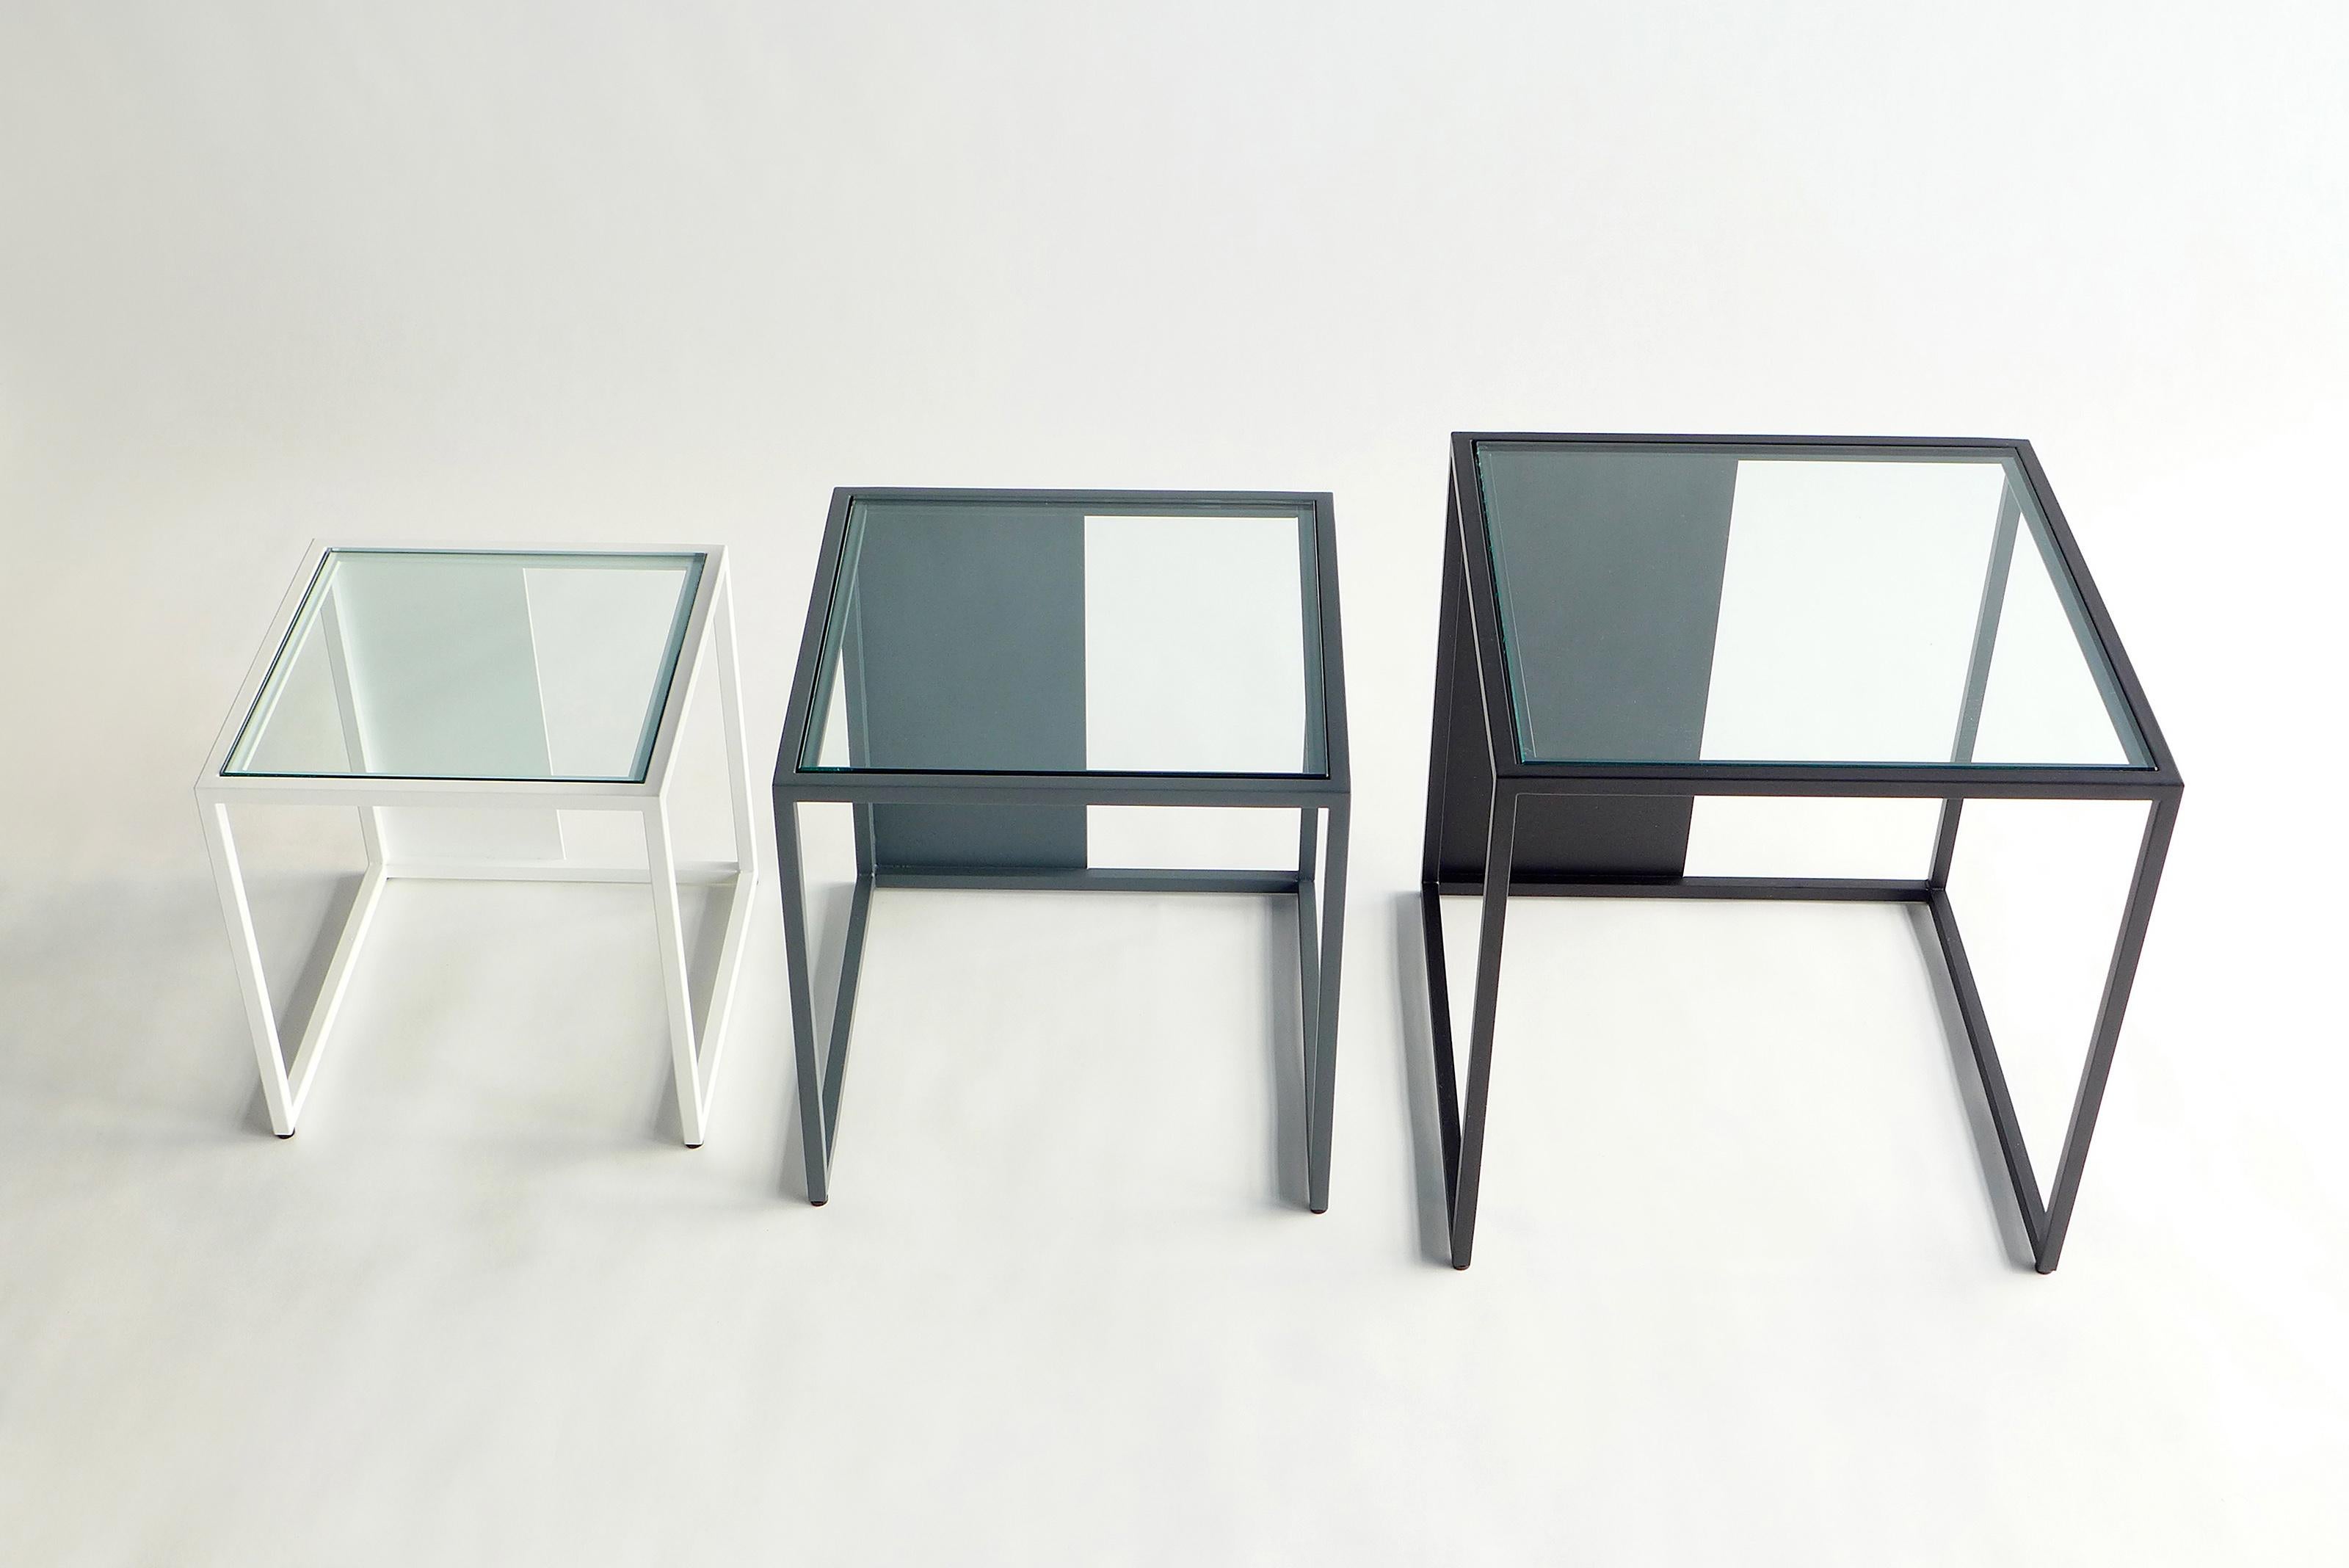 Set Of 3 Half & Half Nesting Tables by Phase Design
Dimensions: Large: D 40.6 x W 40.6  x H 40.6 cm. 
Medium: D 35.6 x W 35.6 x H 35.6 cm. 
Small: D 30.5 x W 30.5 x H 30.5 cm.
Materials: Powder-coated metal and glass. 

Powder-coated square steel